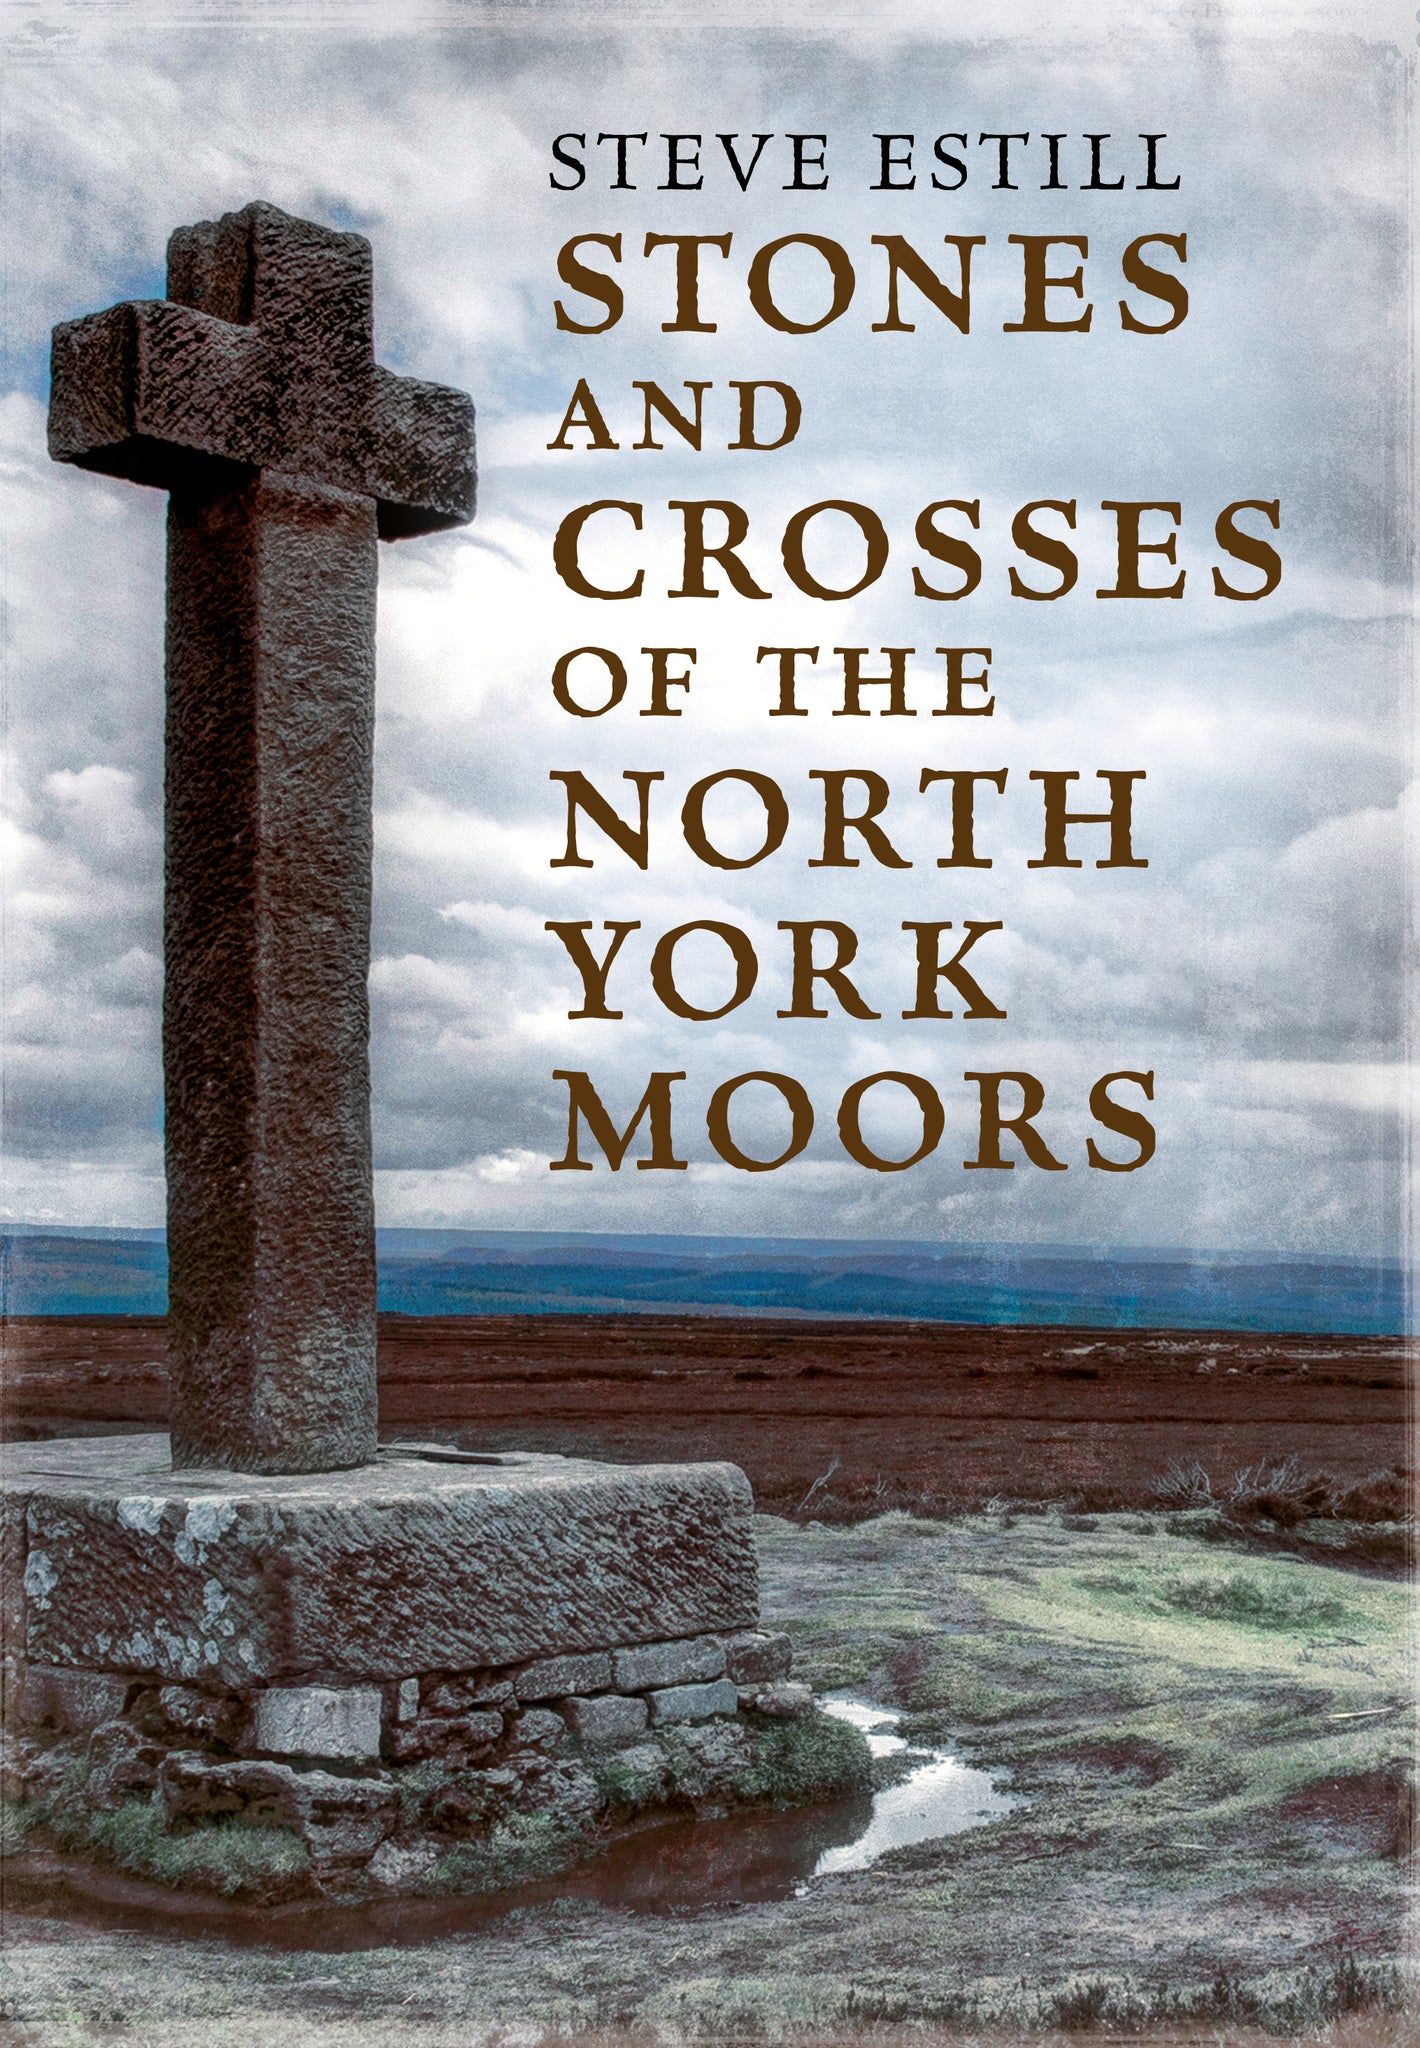 Stones and Crosses of the North York Moors